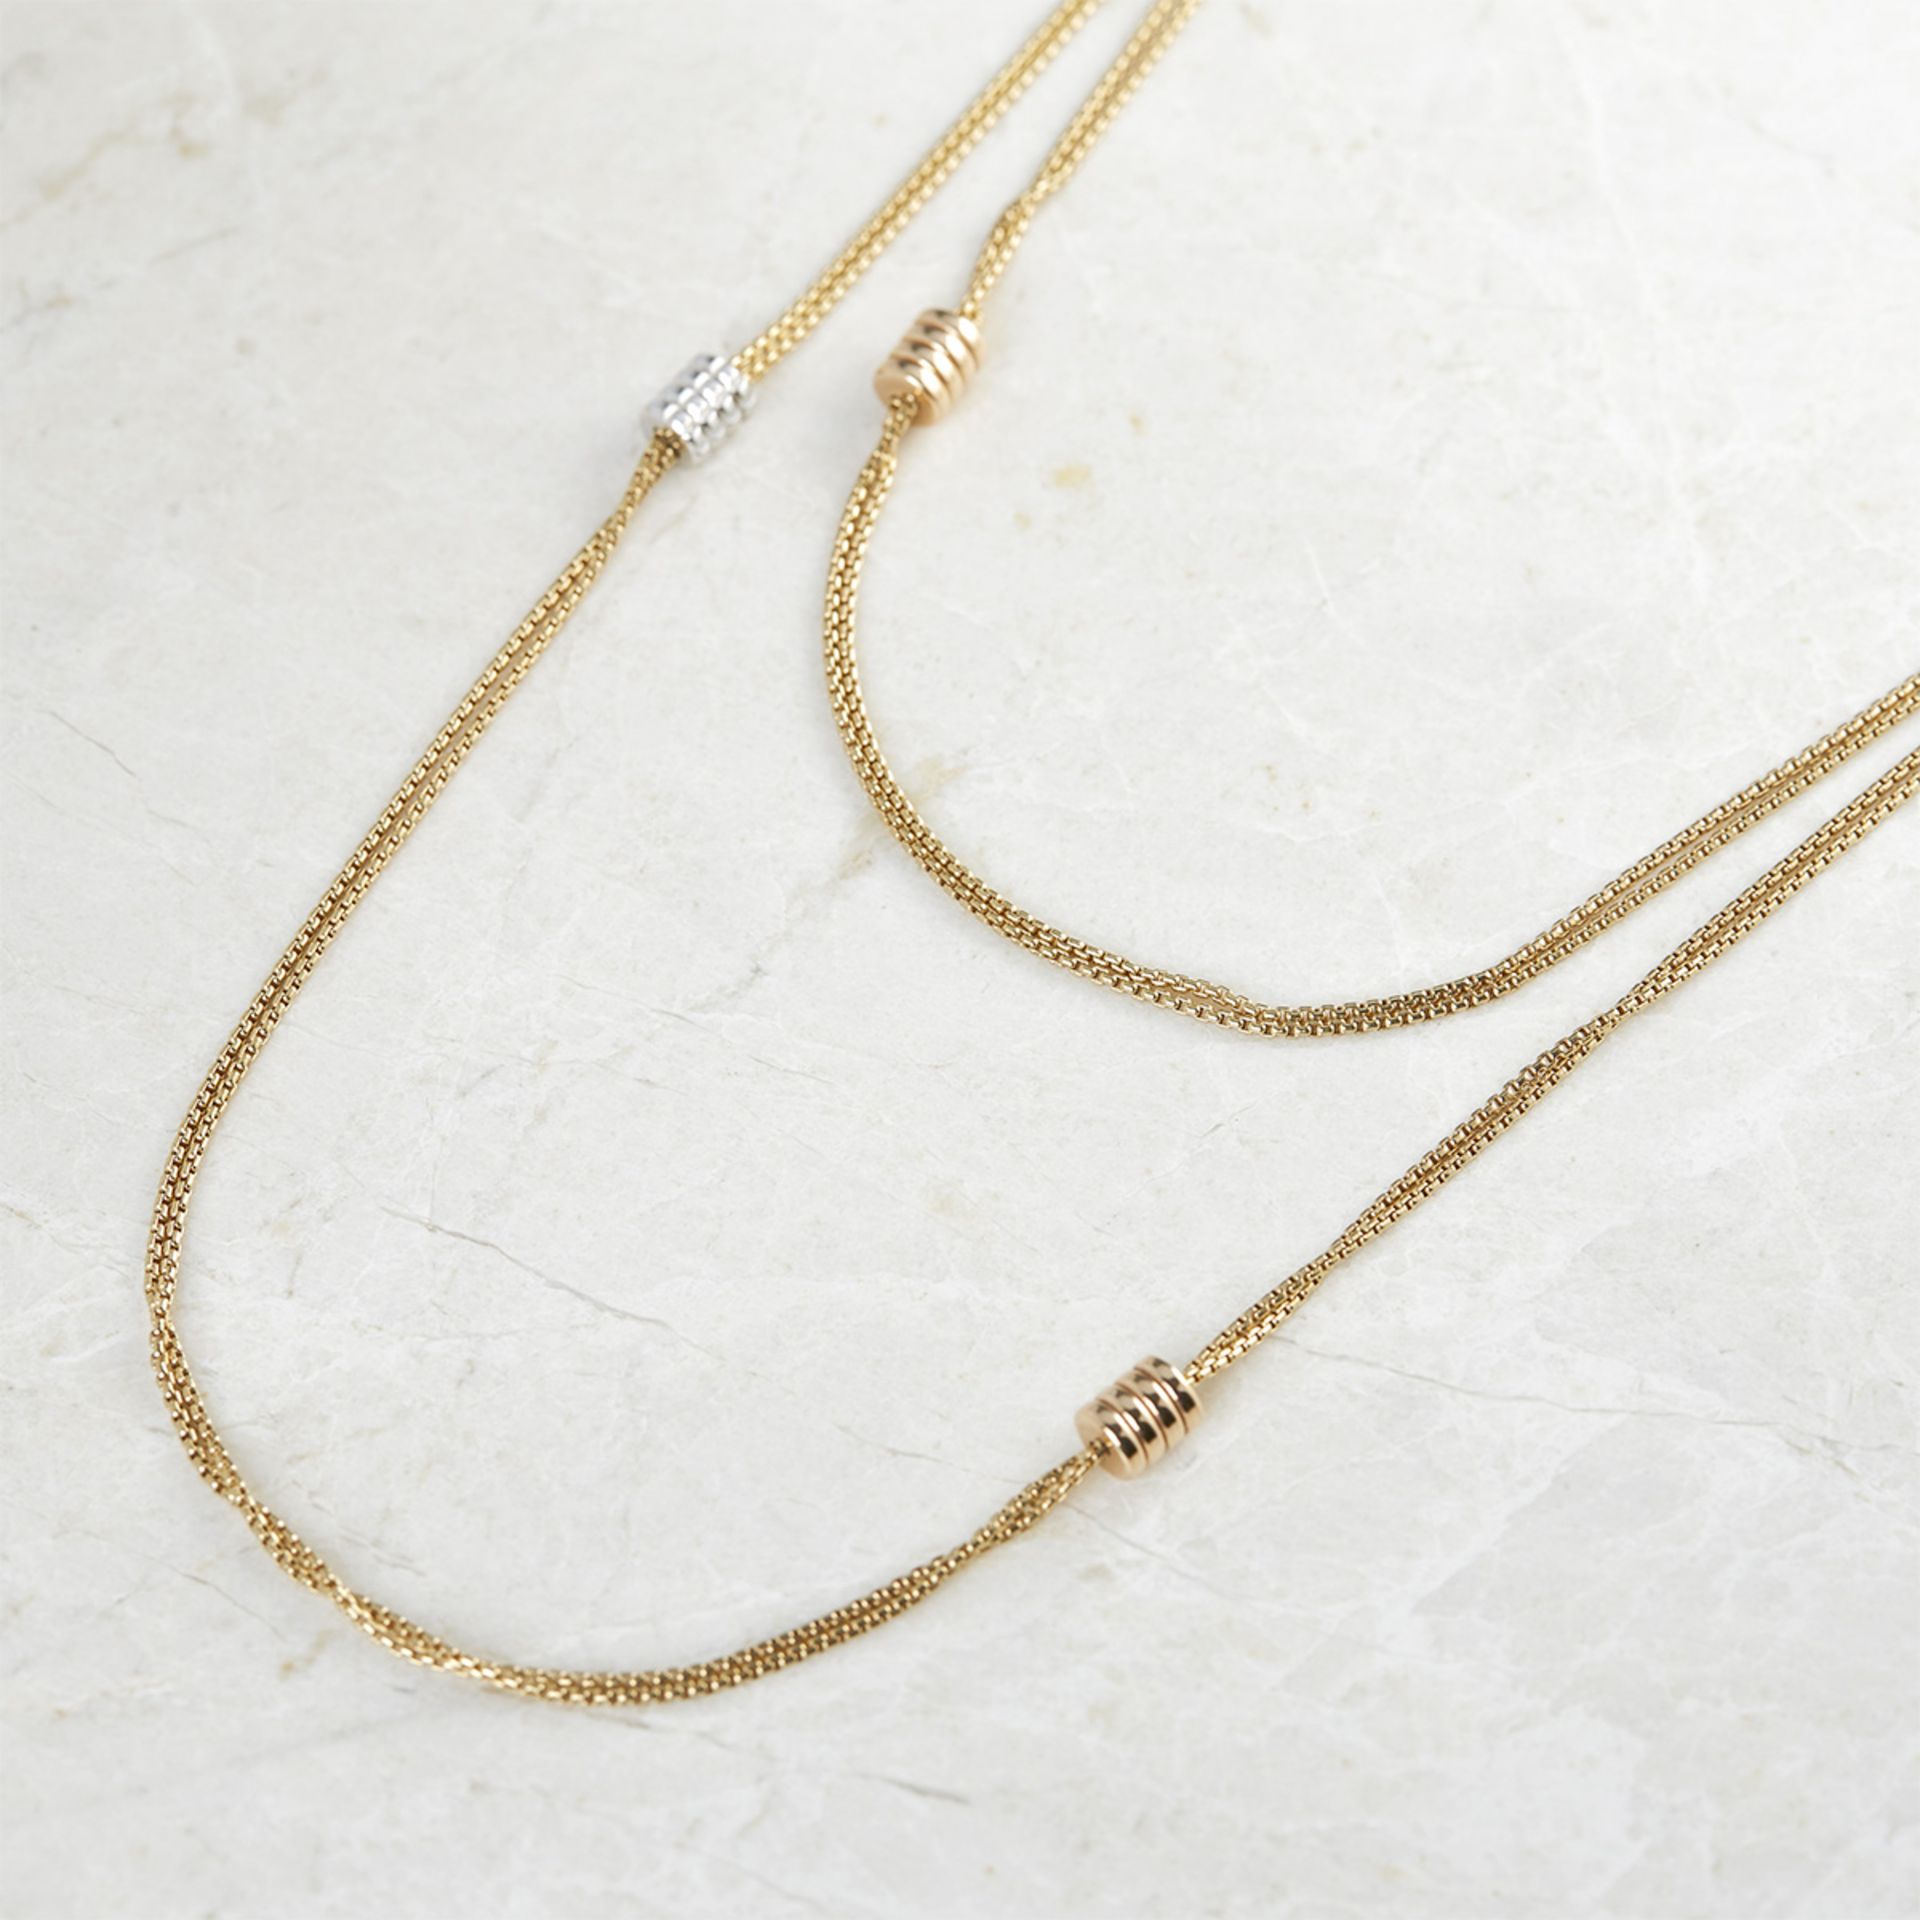 Boucheron 18k Yellow Gold Chain Necklace - Image 2 of 7